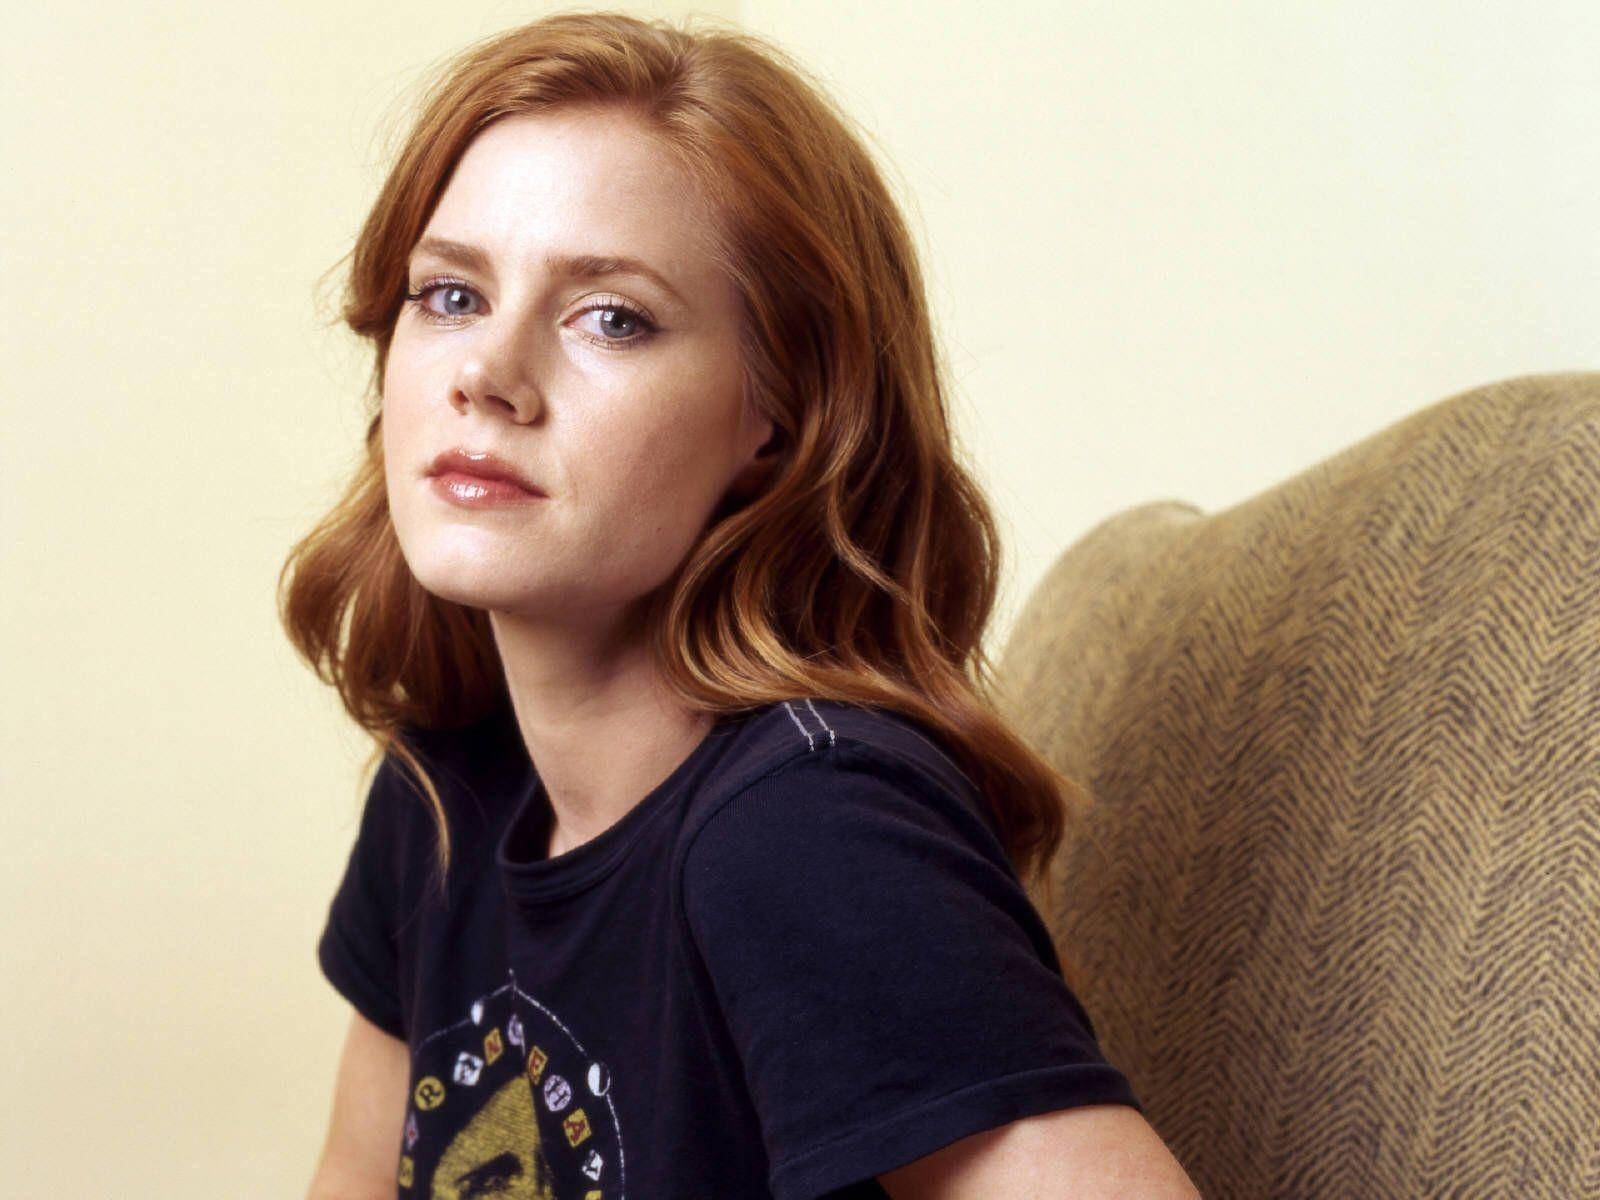 Lovely Photo Of Amy Adams Wallpaper